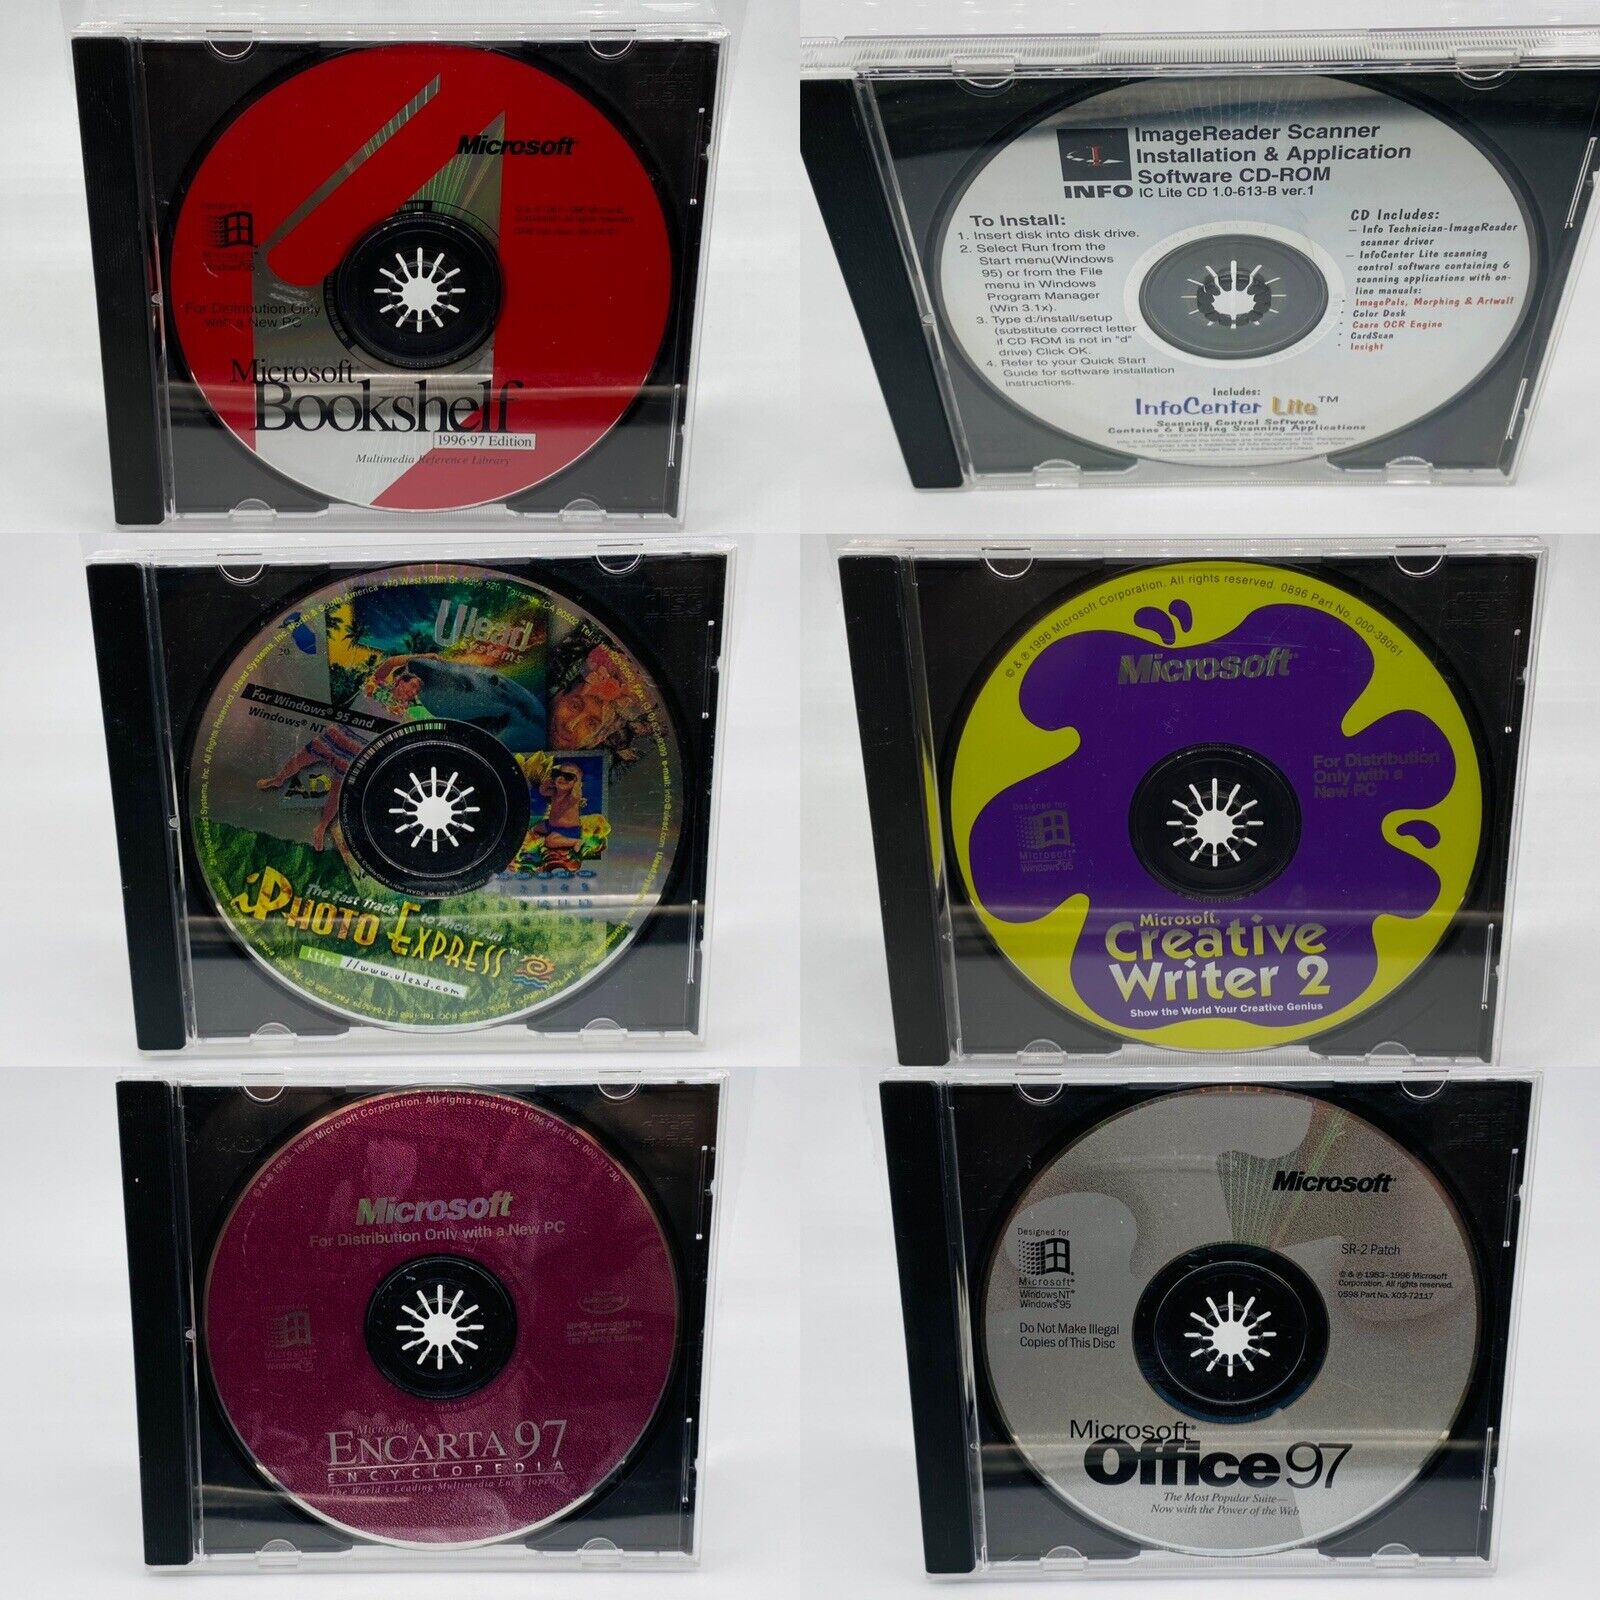 VTG Computer Software Lot Of 6 Discs Microsoft, Ulead Systems, Info Center Lite